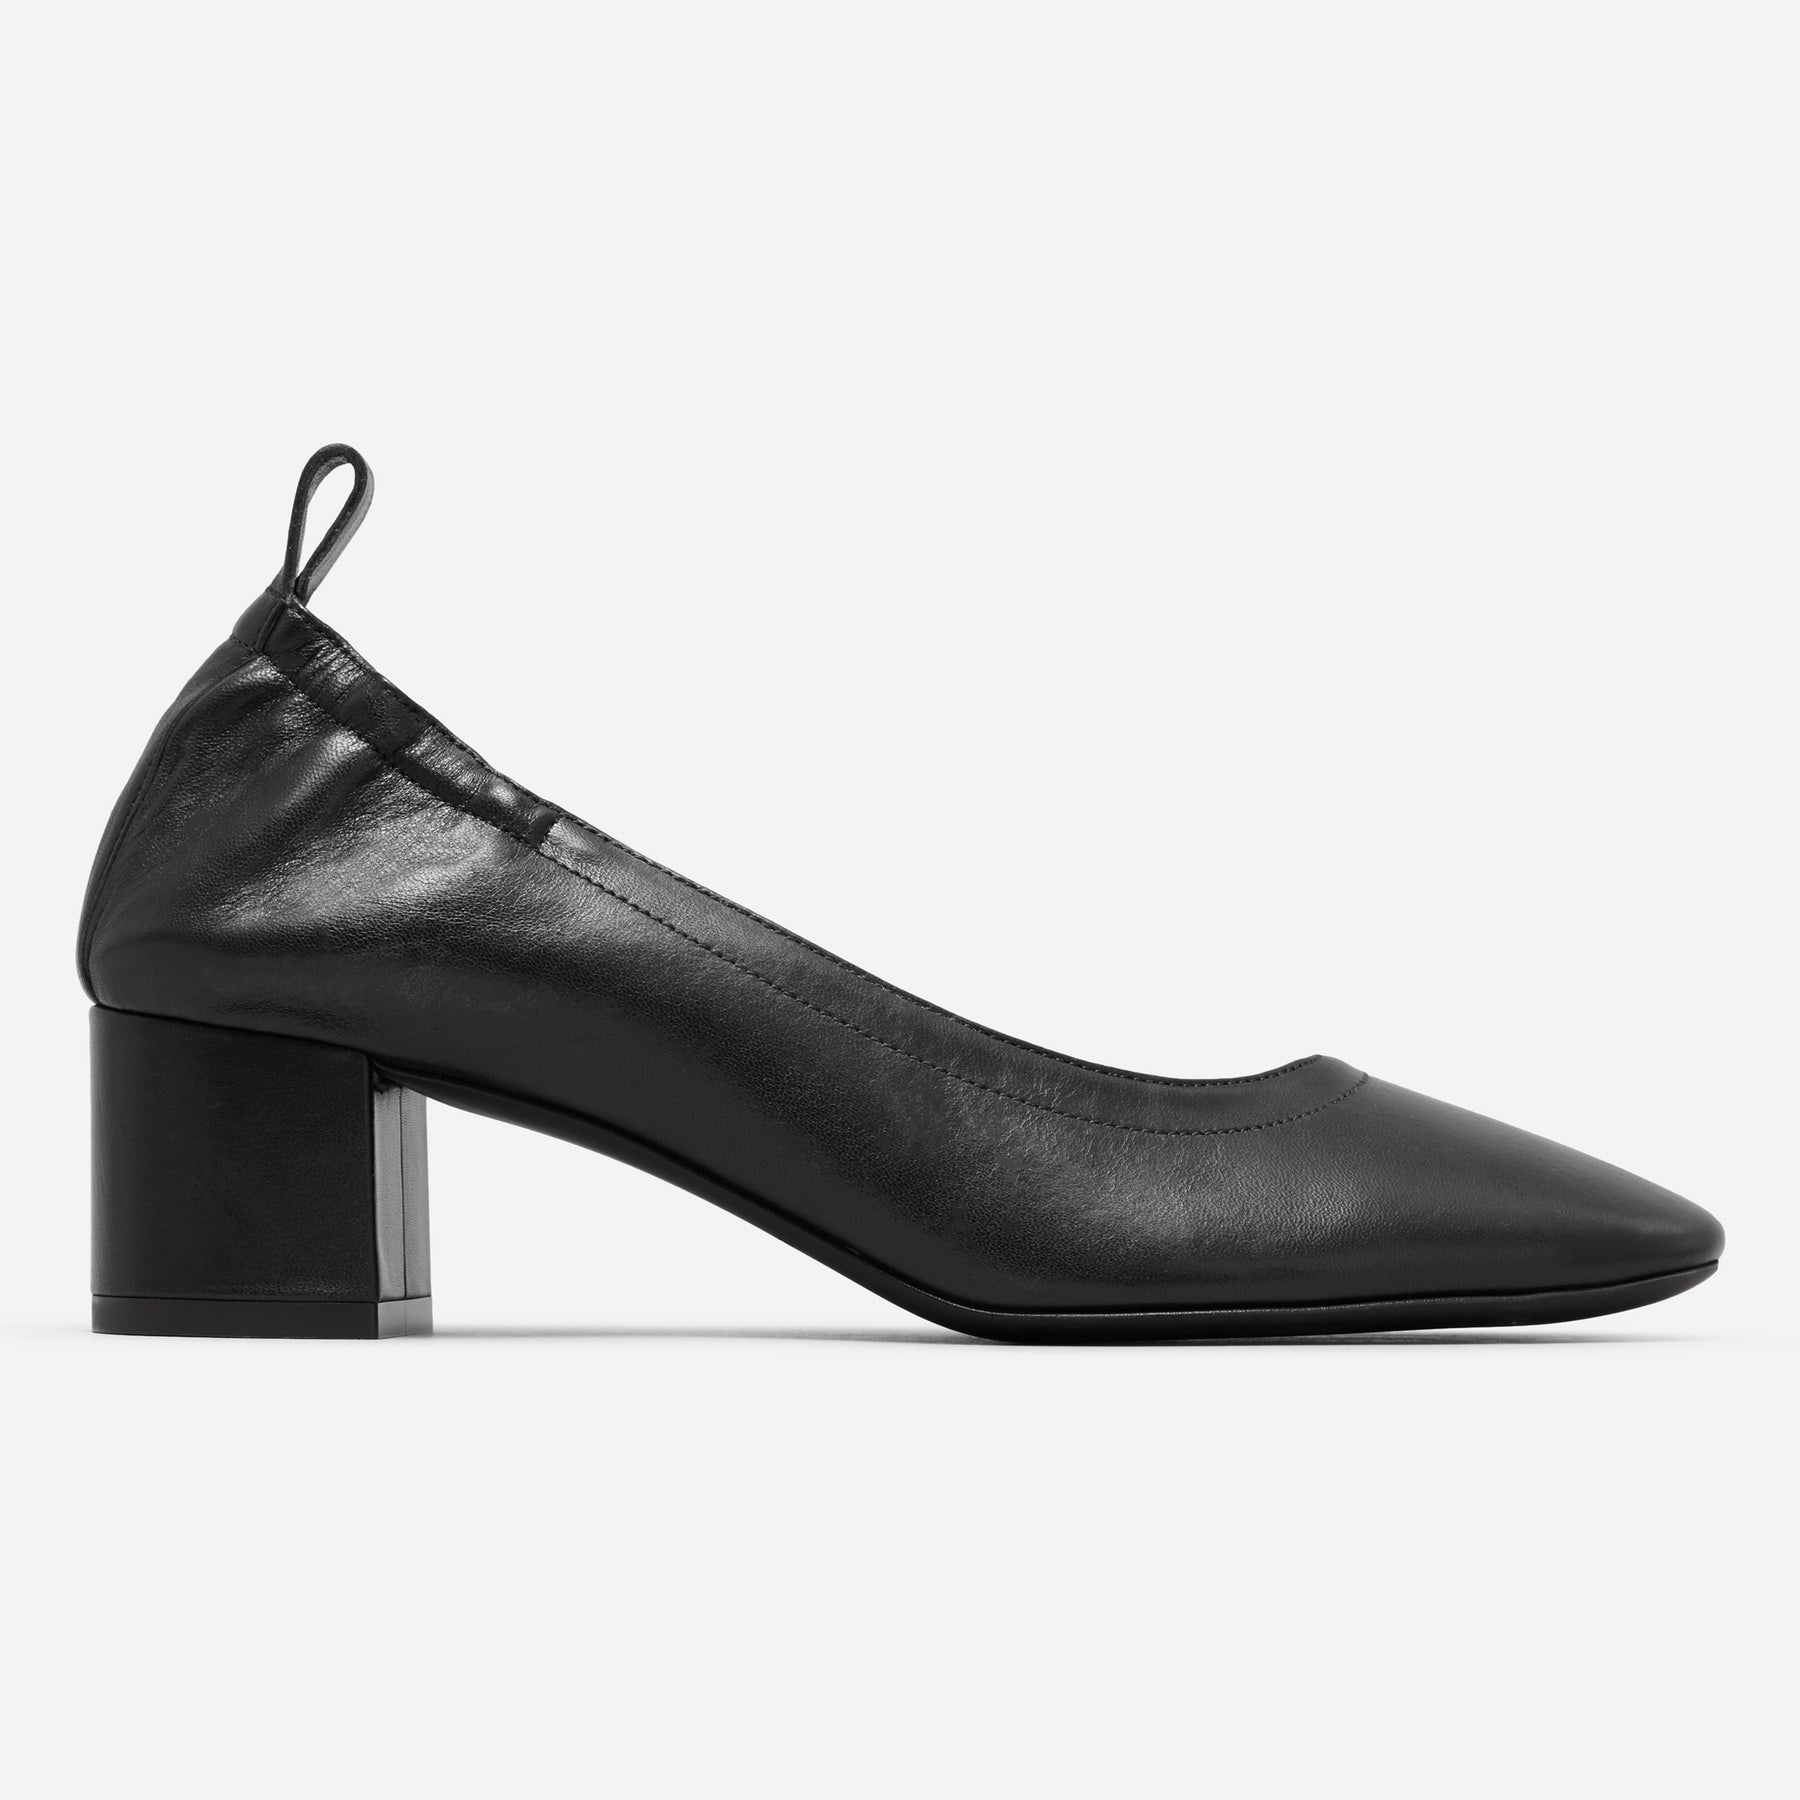 The Day Heel in Black 